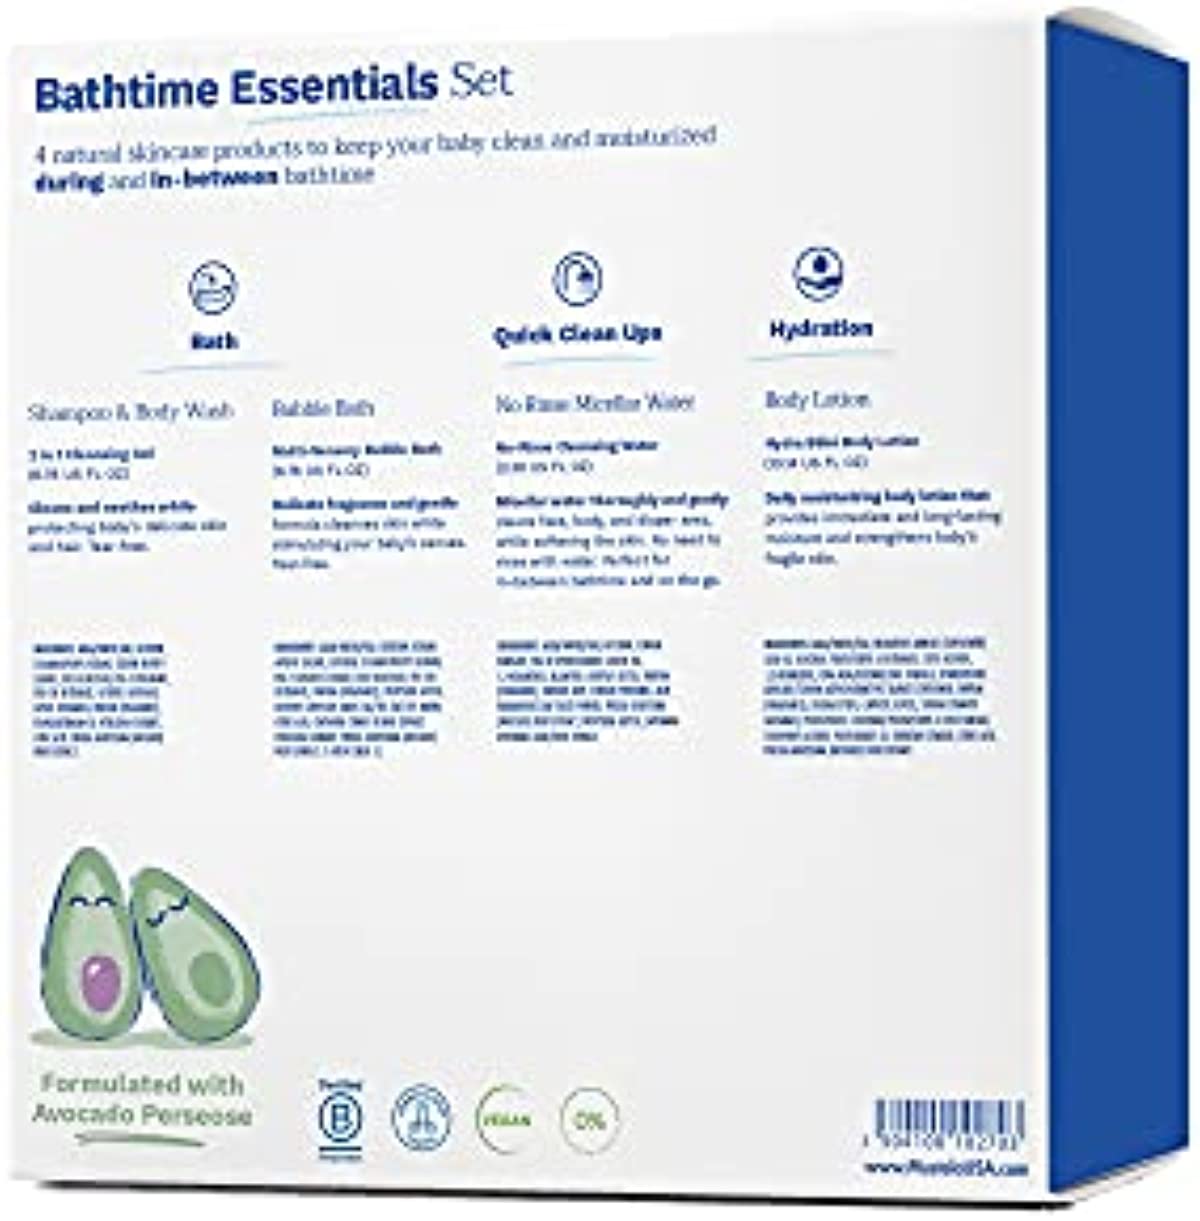 Mustela Baby Bath Time Essentials Gift Set - Natural & Plant-Based Baby Skin Care - 4 Items Set